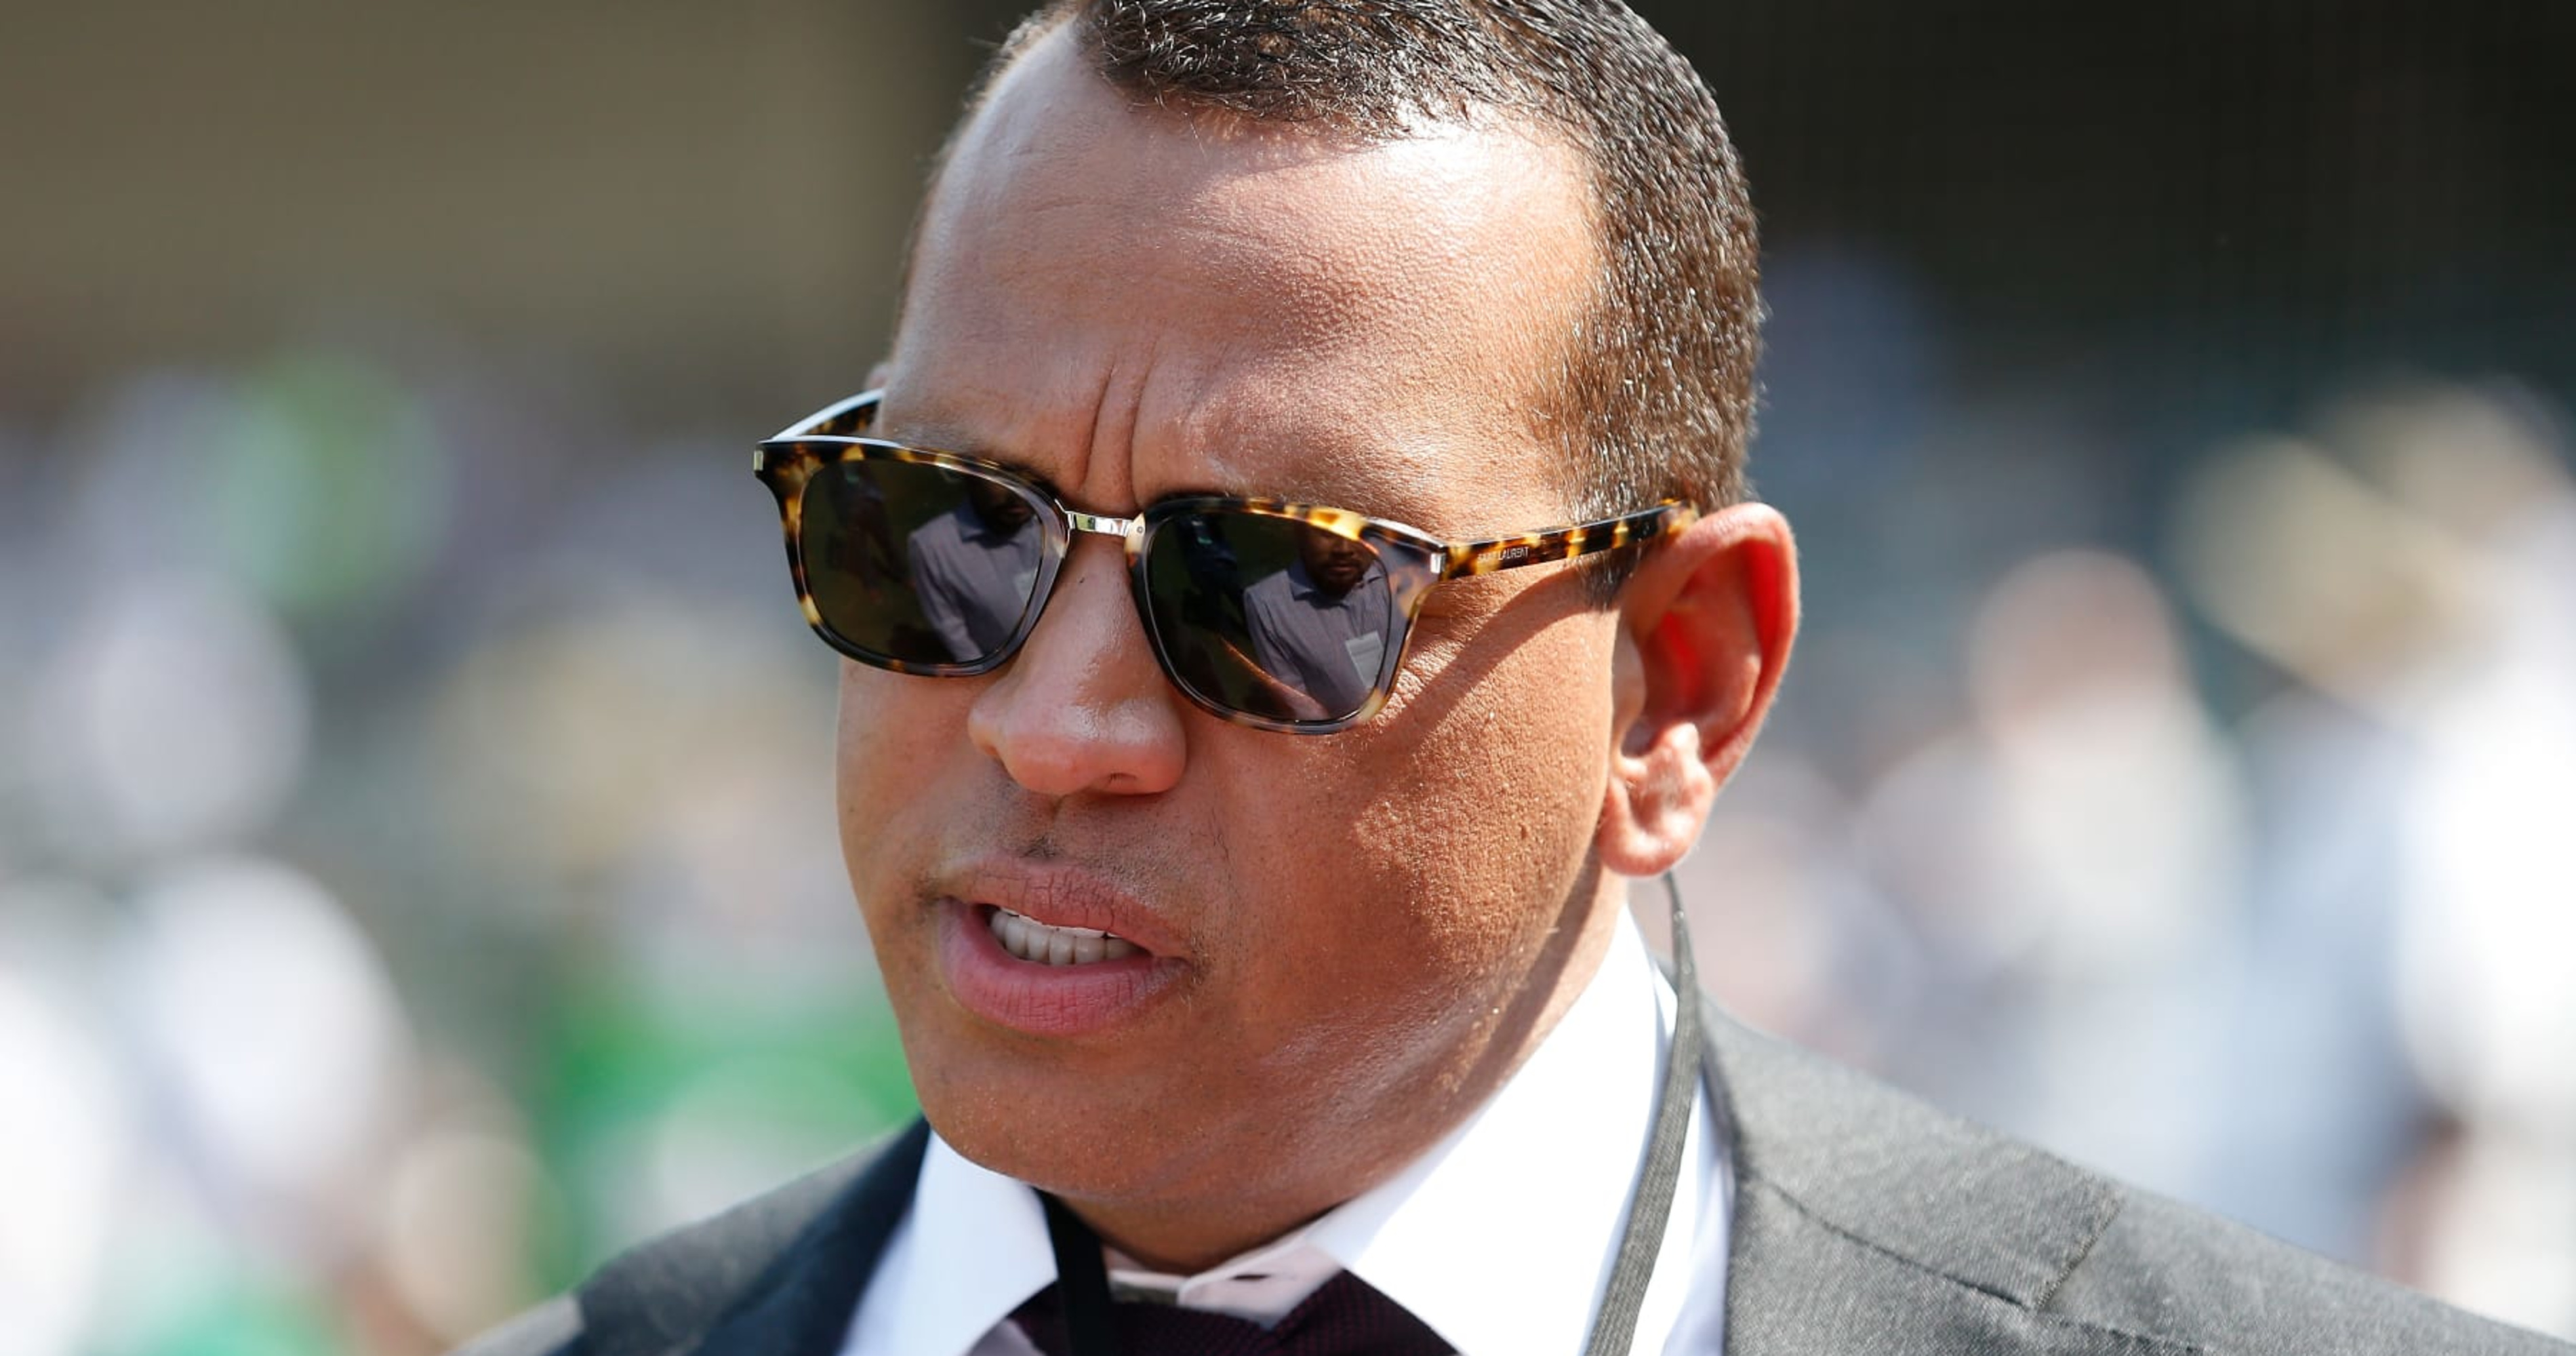 Alex Rodriguez says farewell to New York Yankees pinstripes – The